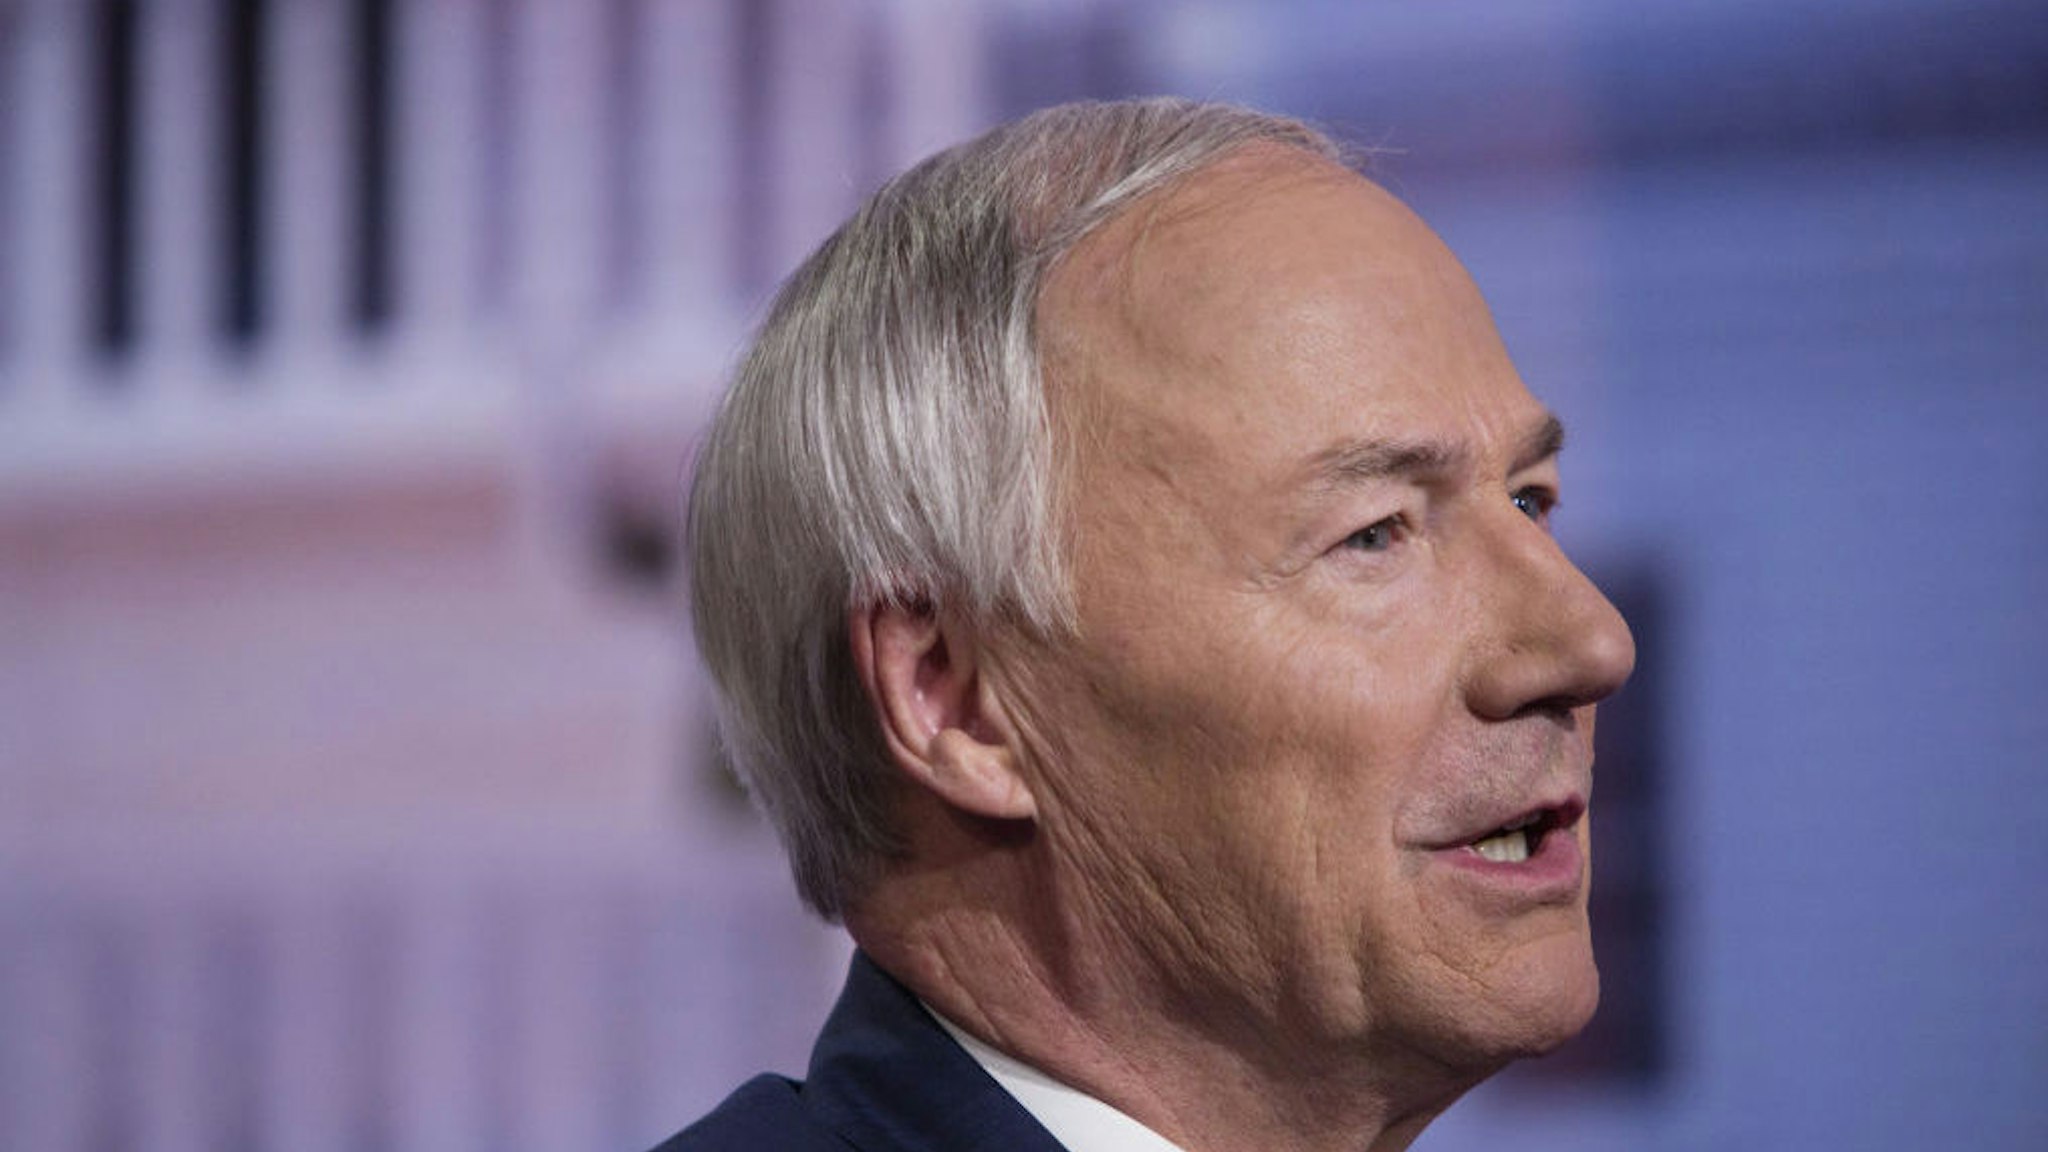 Asa Hutchinson, governor of Arkansas, speaks during a Bloomberg Television interview in New York, U.S., on Tuesday, May 28, 2019. Hutchinson discussed what Arkansas is doing to brace for more severe flooding in the state. Photographer: